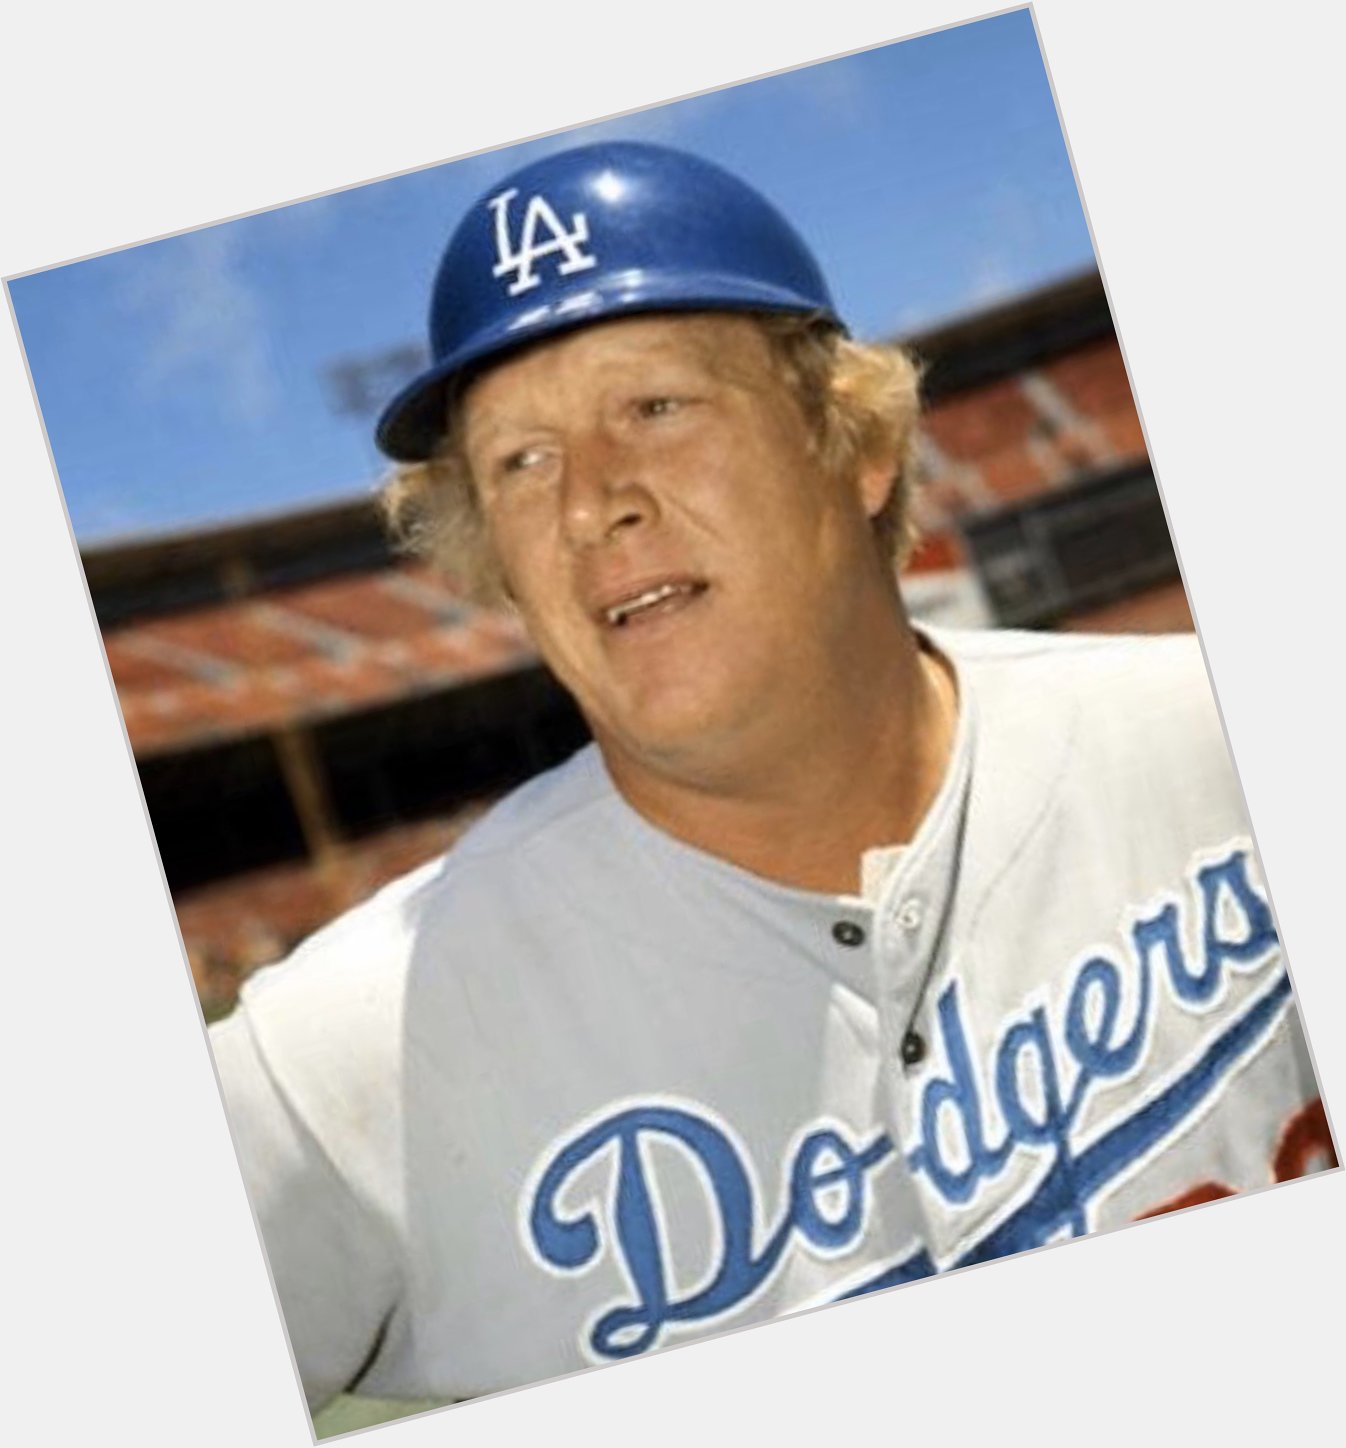 Happy birthday to Boog Powell who probably doesn t remember when he was a Dodger either 